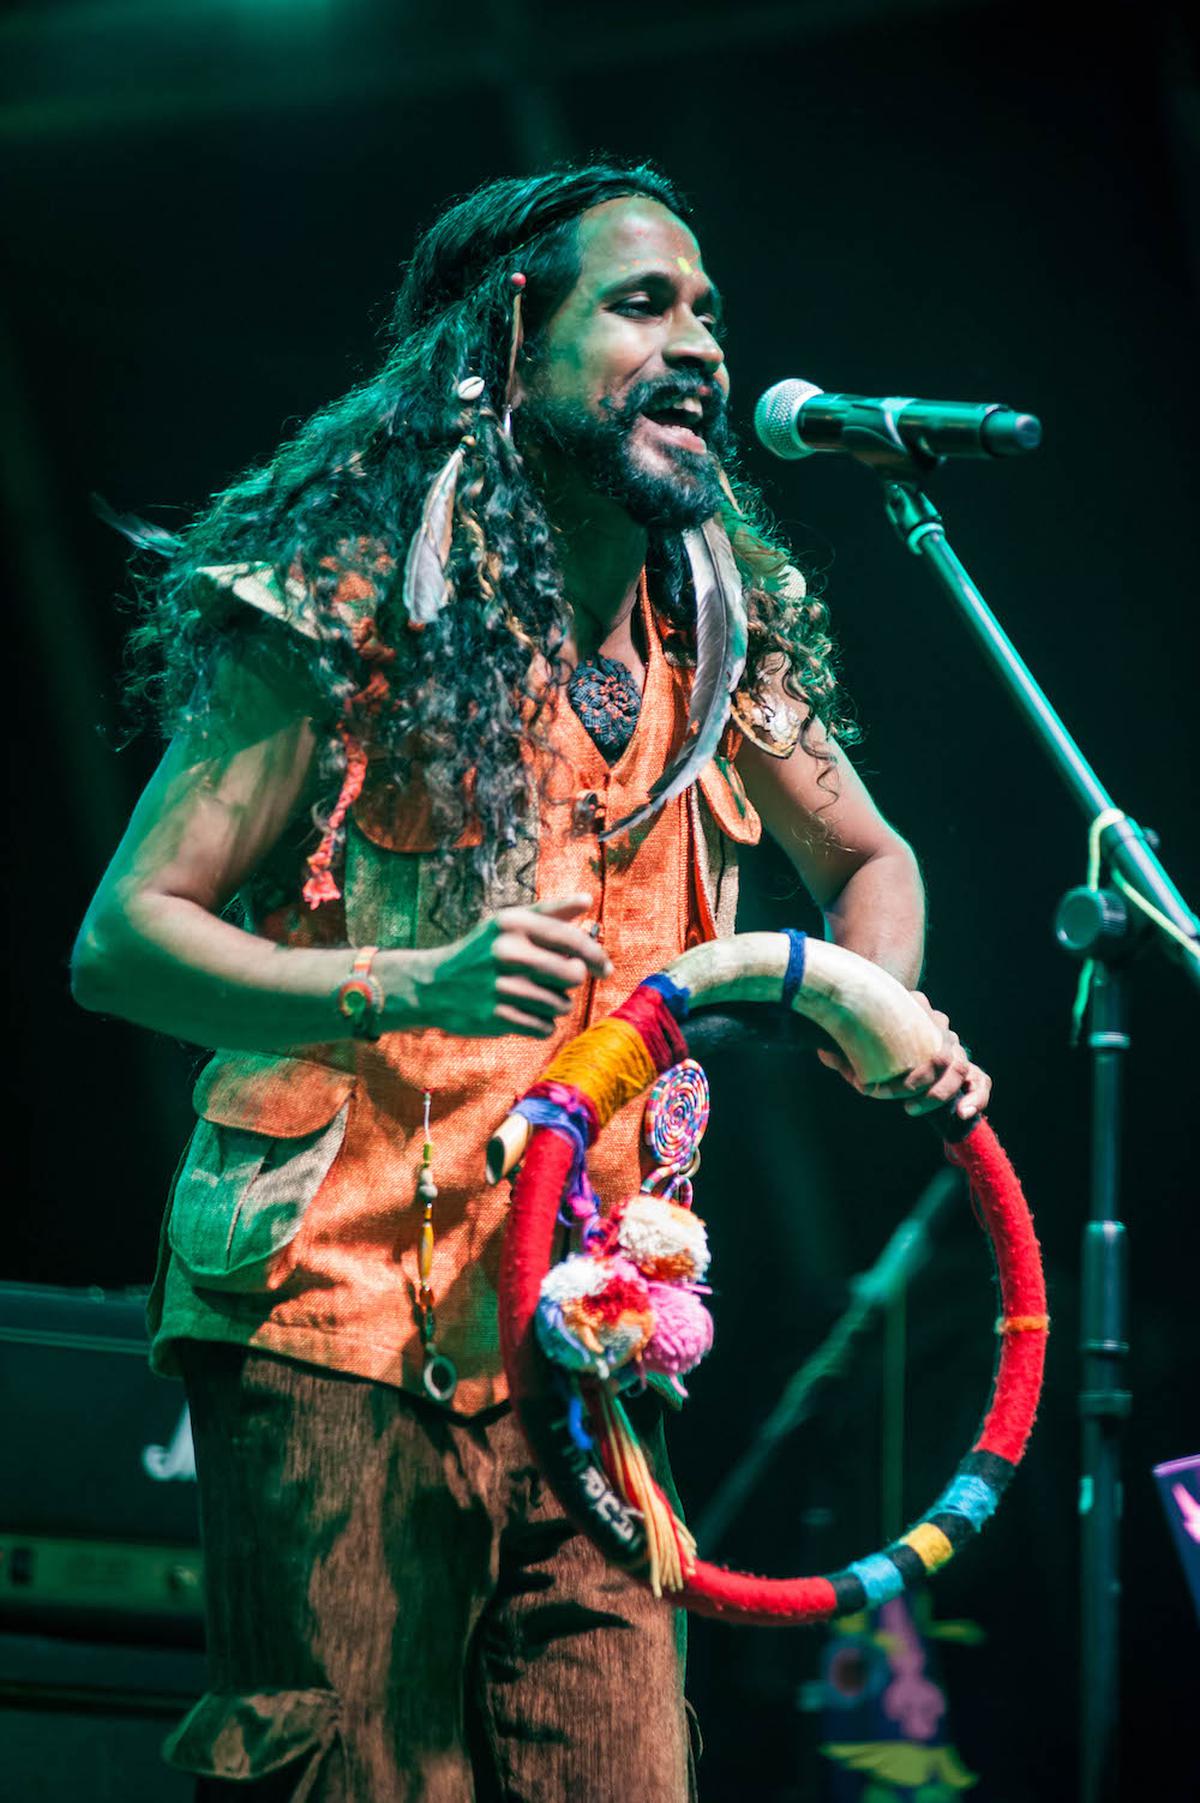 Martin, vocalist of Oorali, the folk-fusion band from Kerala